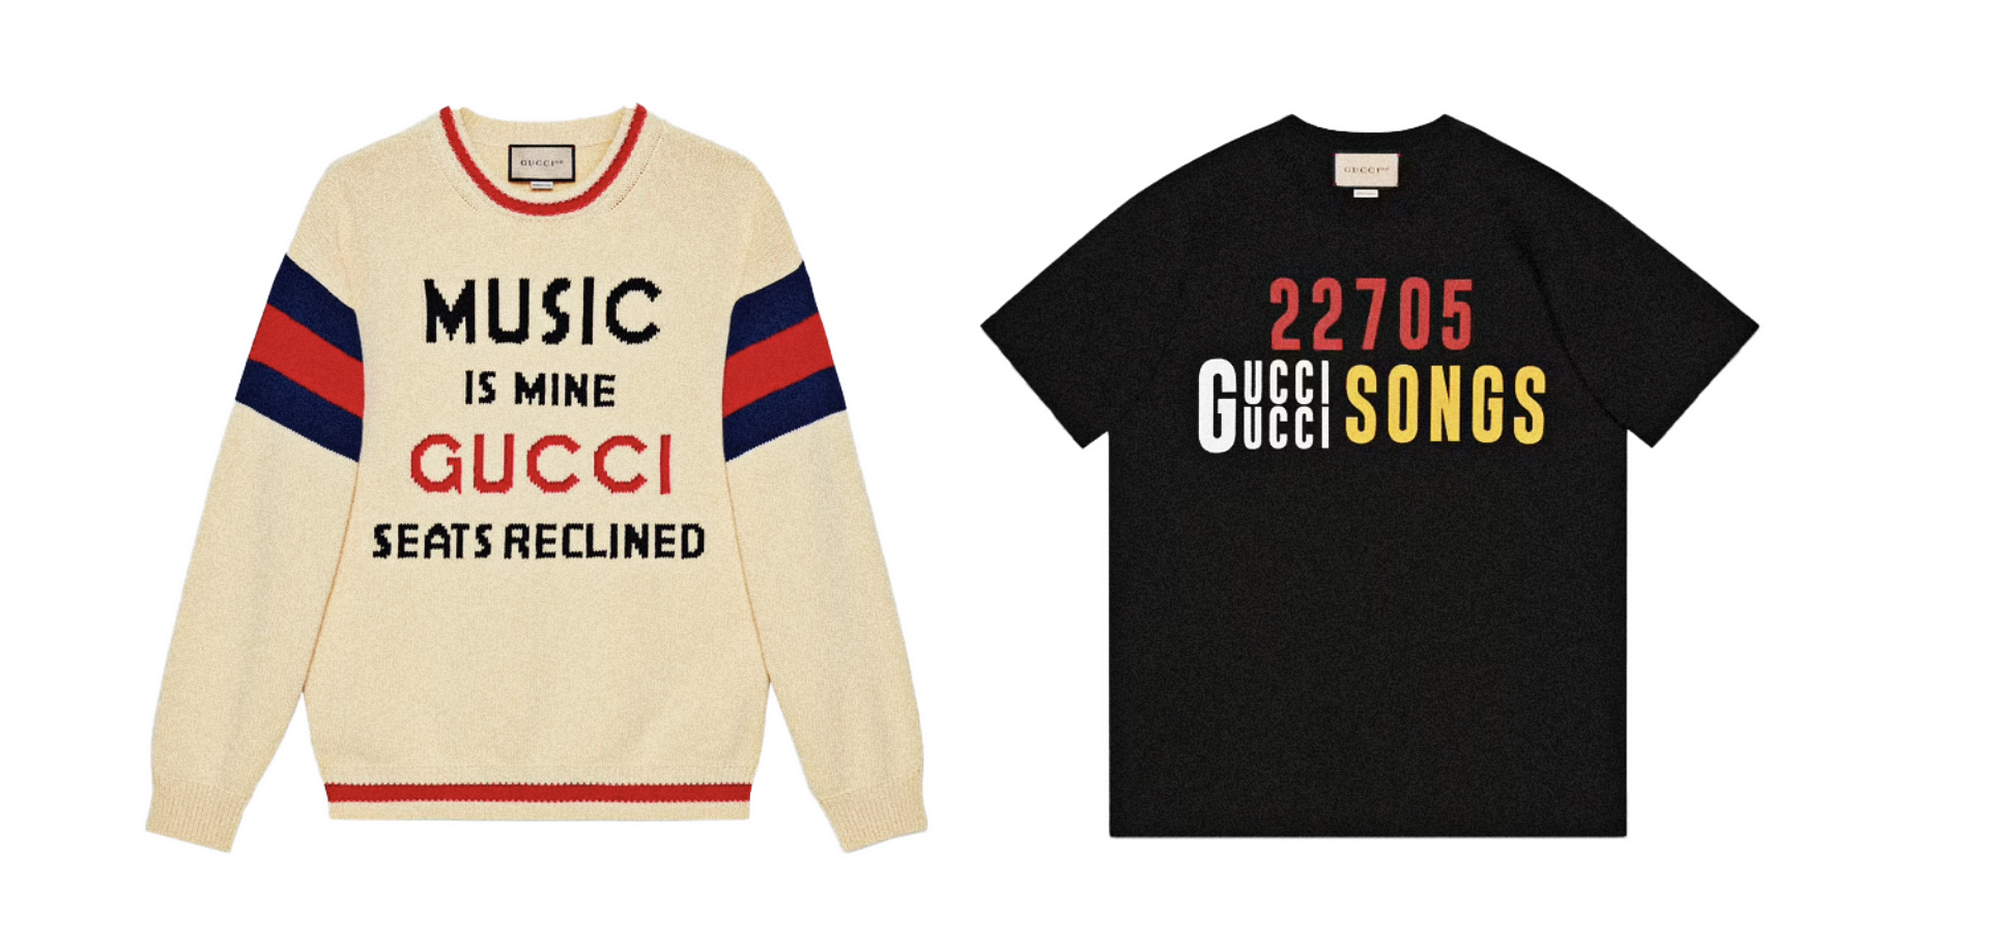 22,705 Gucci songs, a fashion line by powered by Musixmatch celebrating the power of music | by Musixmatch Musixmatch Blog | Medium